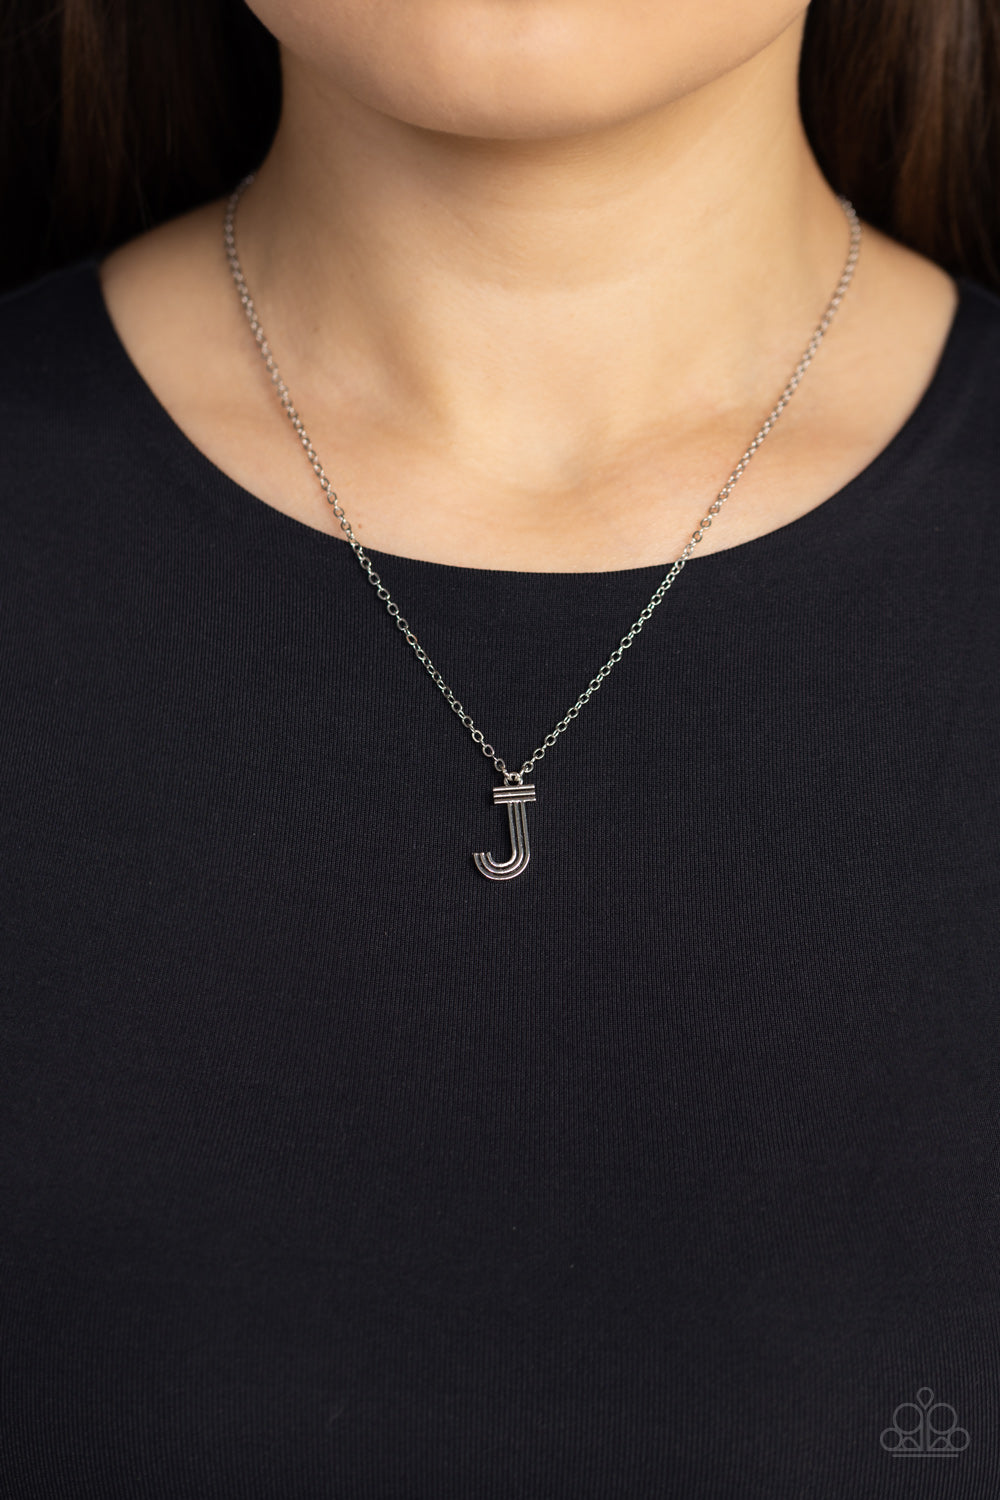 Leave Your Initials - Silver "J" Pendant Necklace & matching earrings